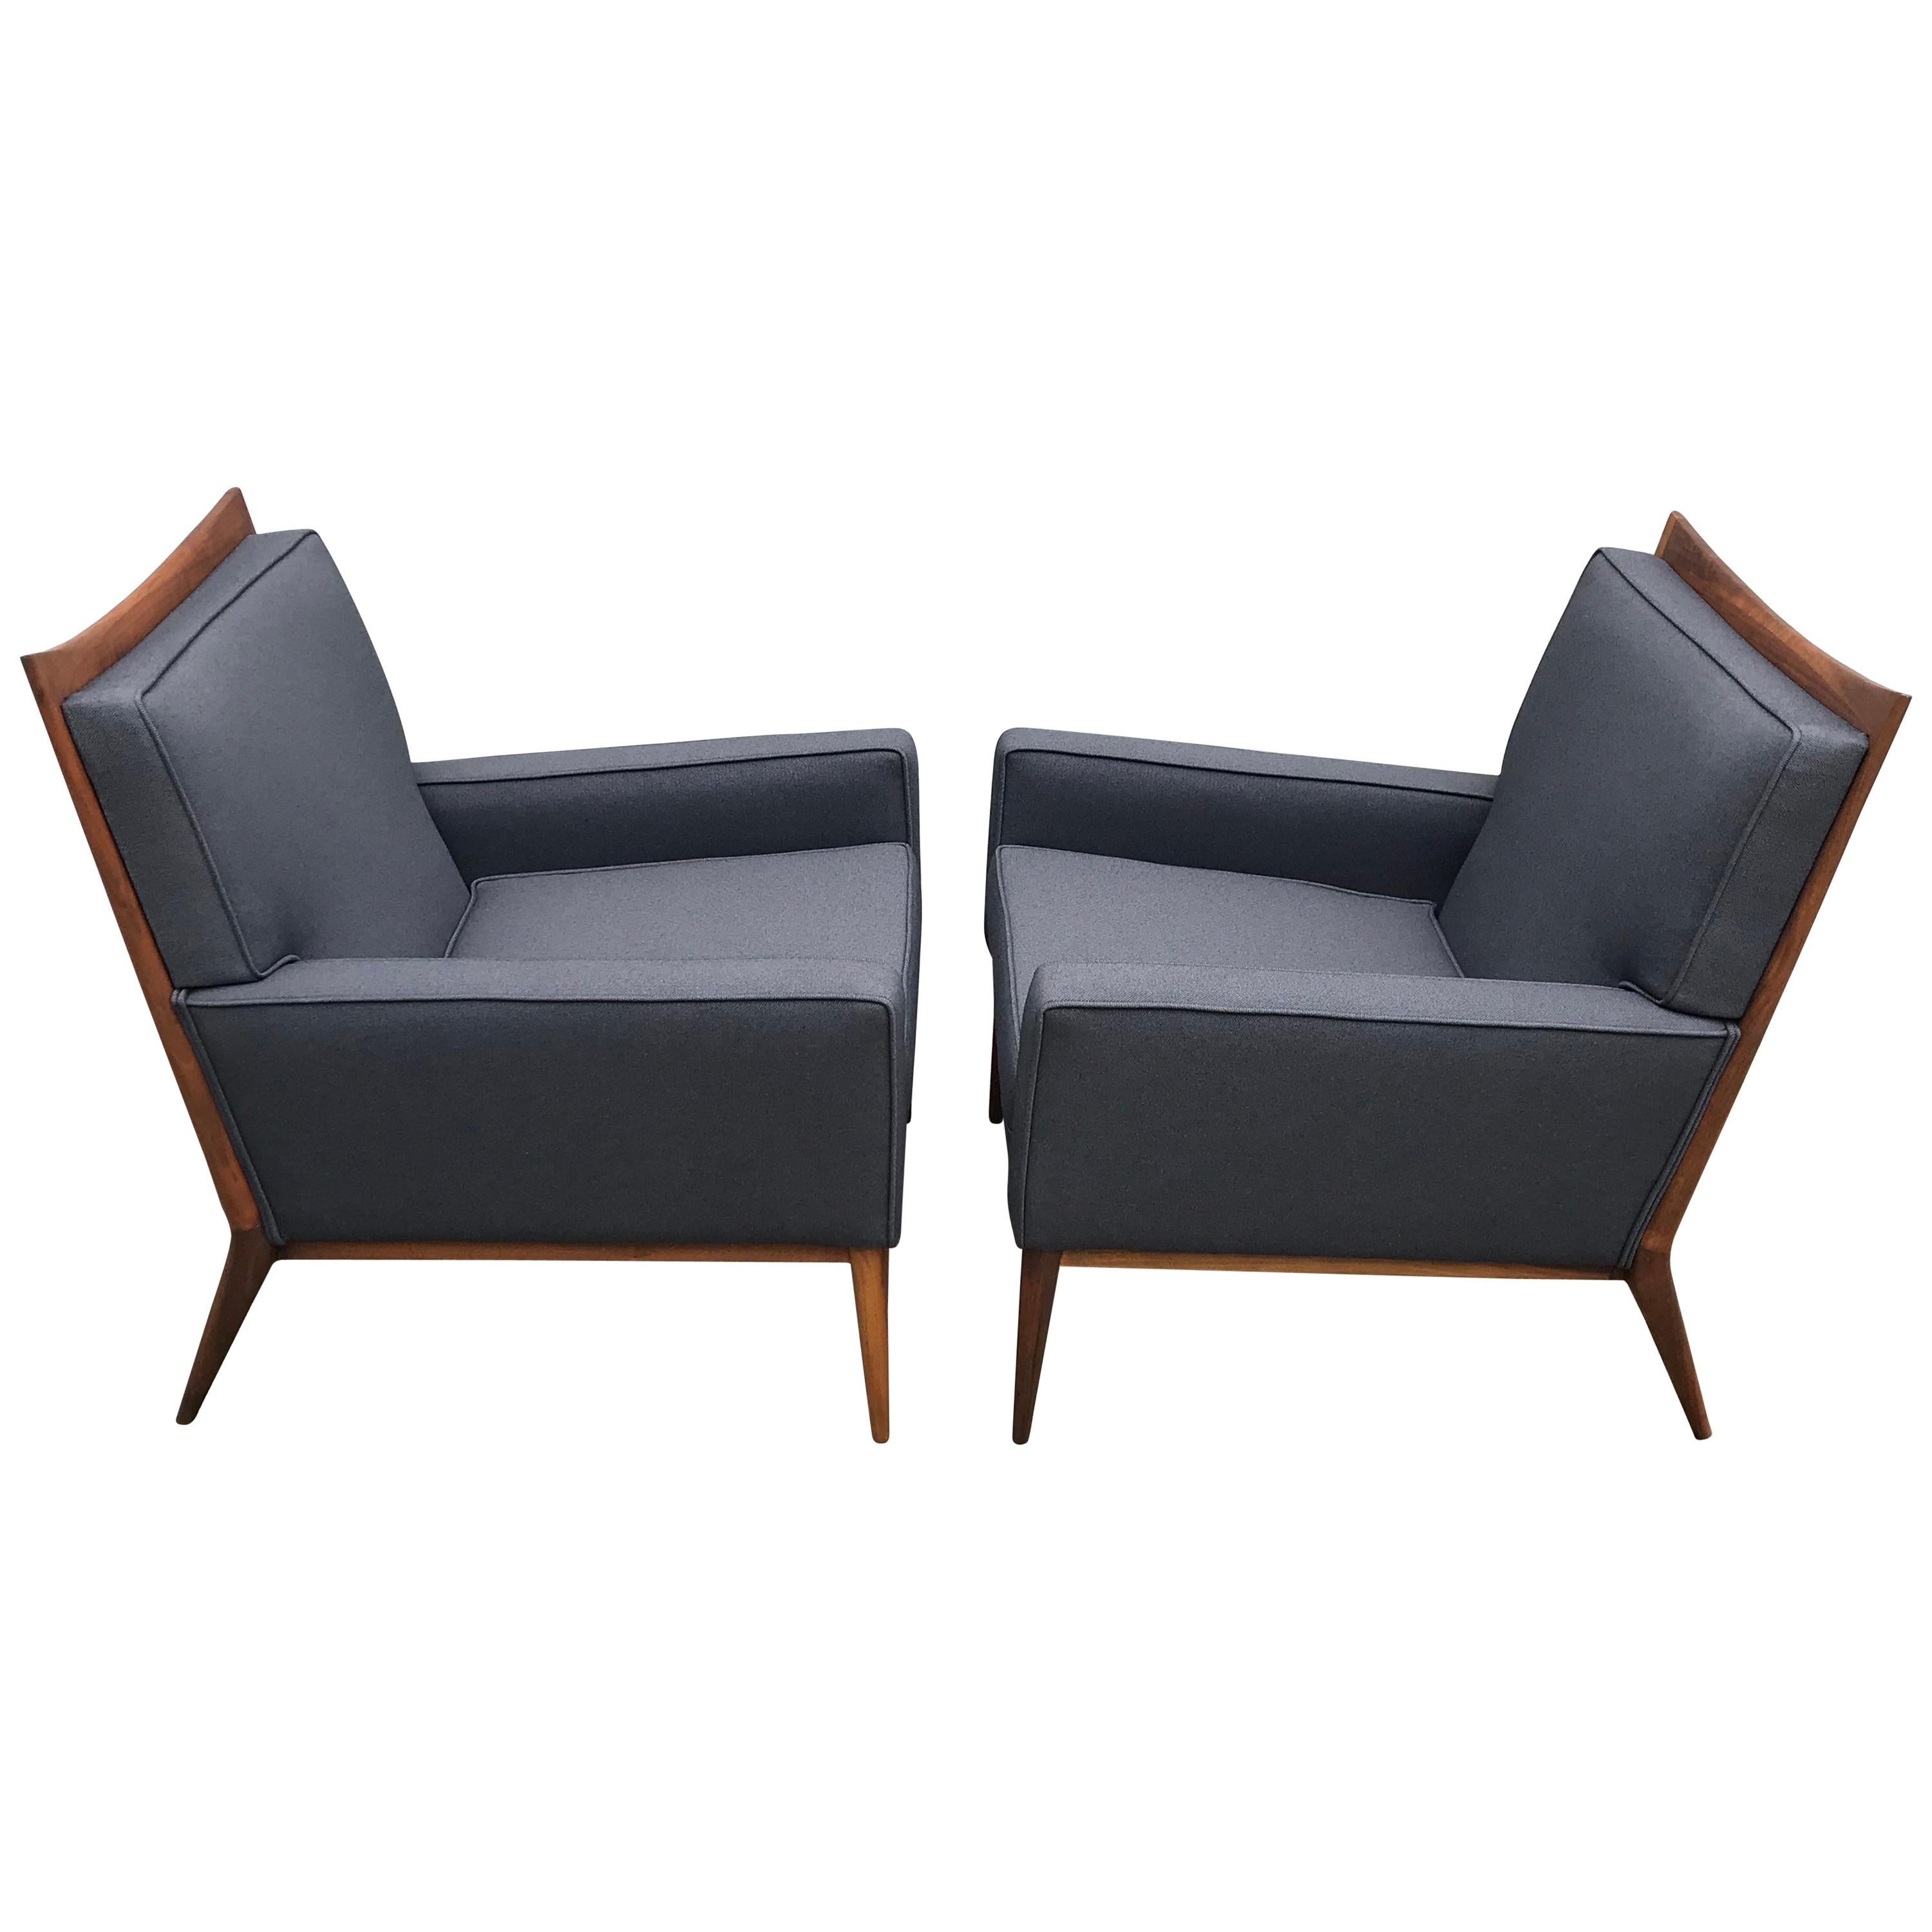 Pair of Slate Grey Paul McCobb Lounge Club Chairs for Directional, 1950's